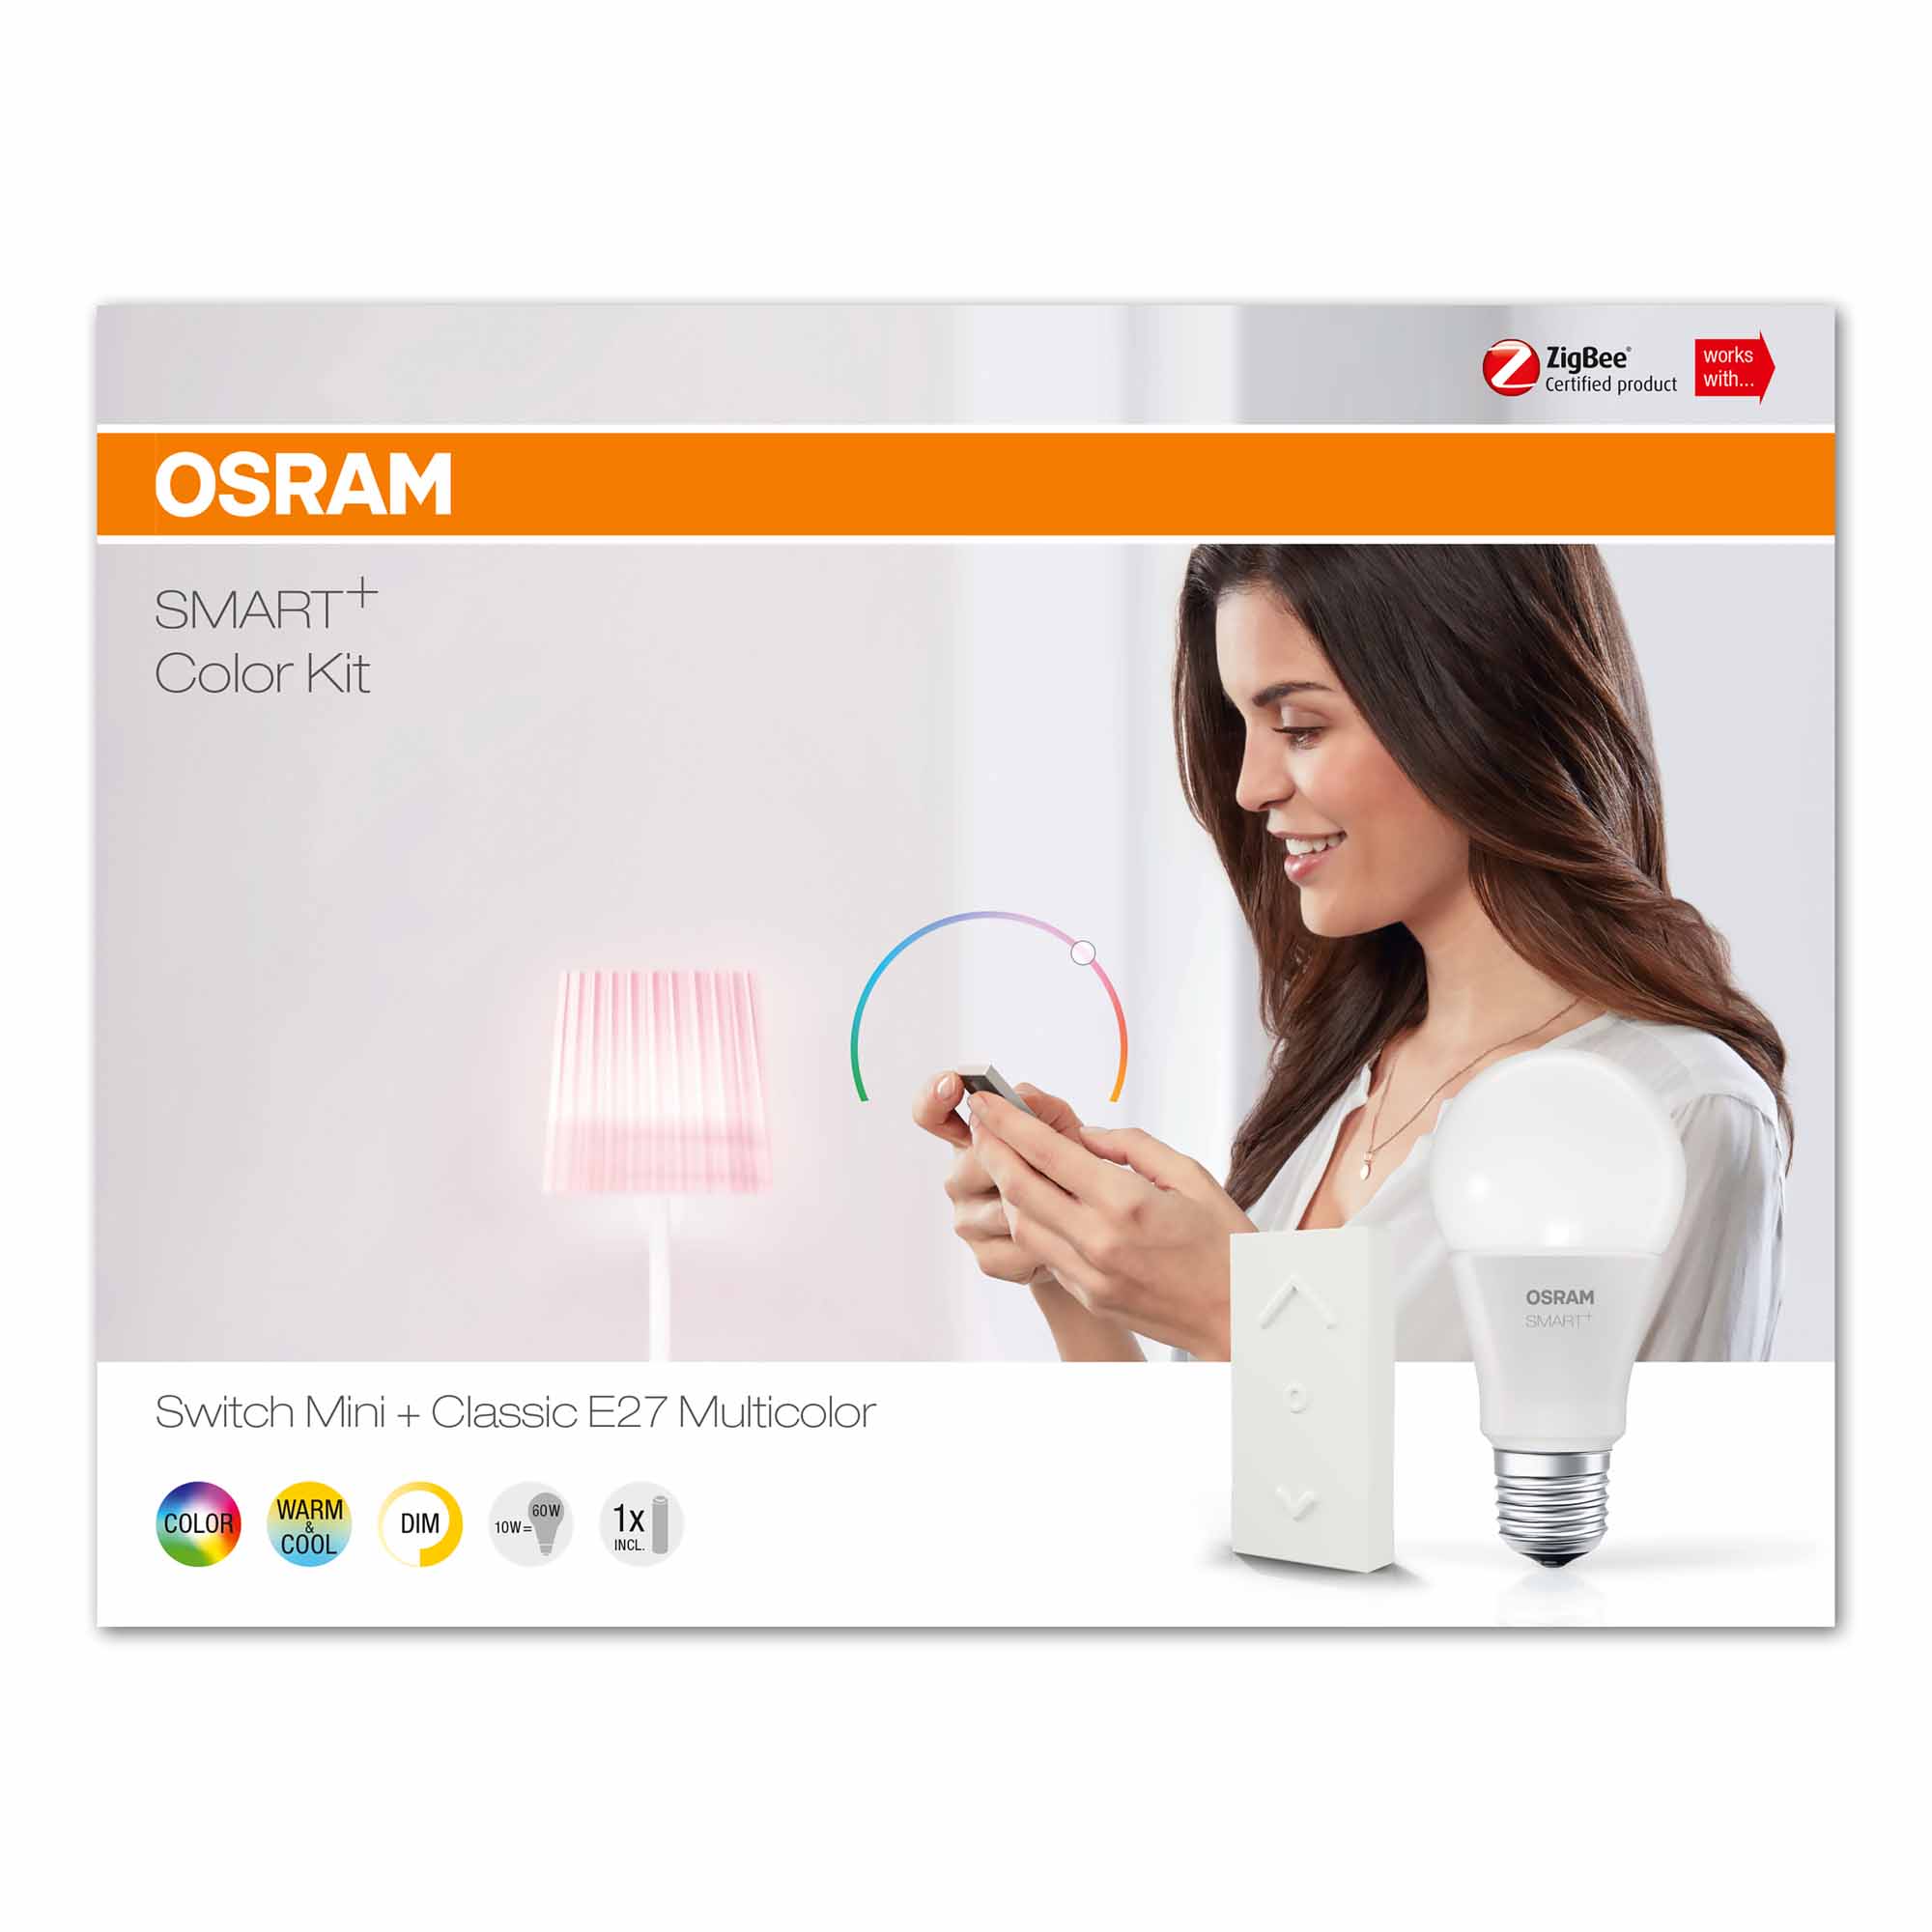 Osram Smart+ Color Switch Mini Kit, E27 RGBW + Dimming Switch 2200-6500K 600lm